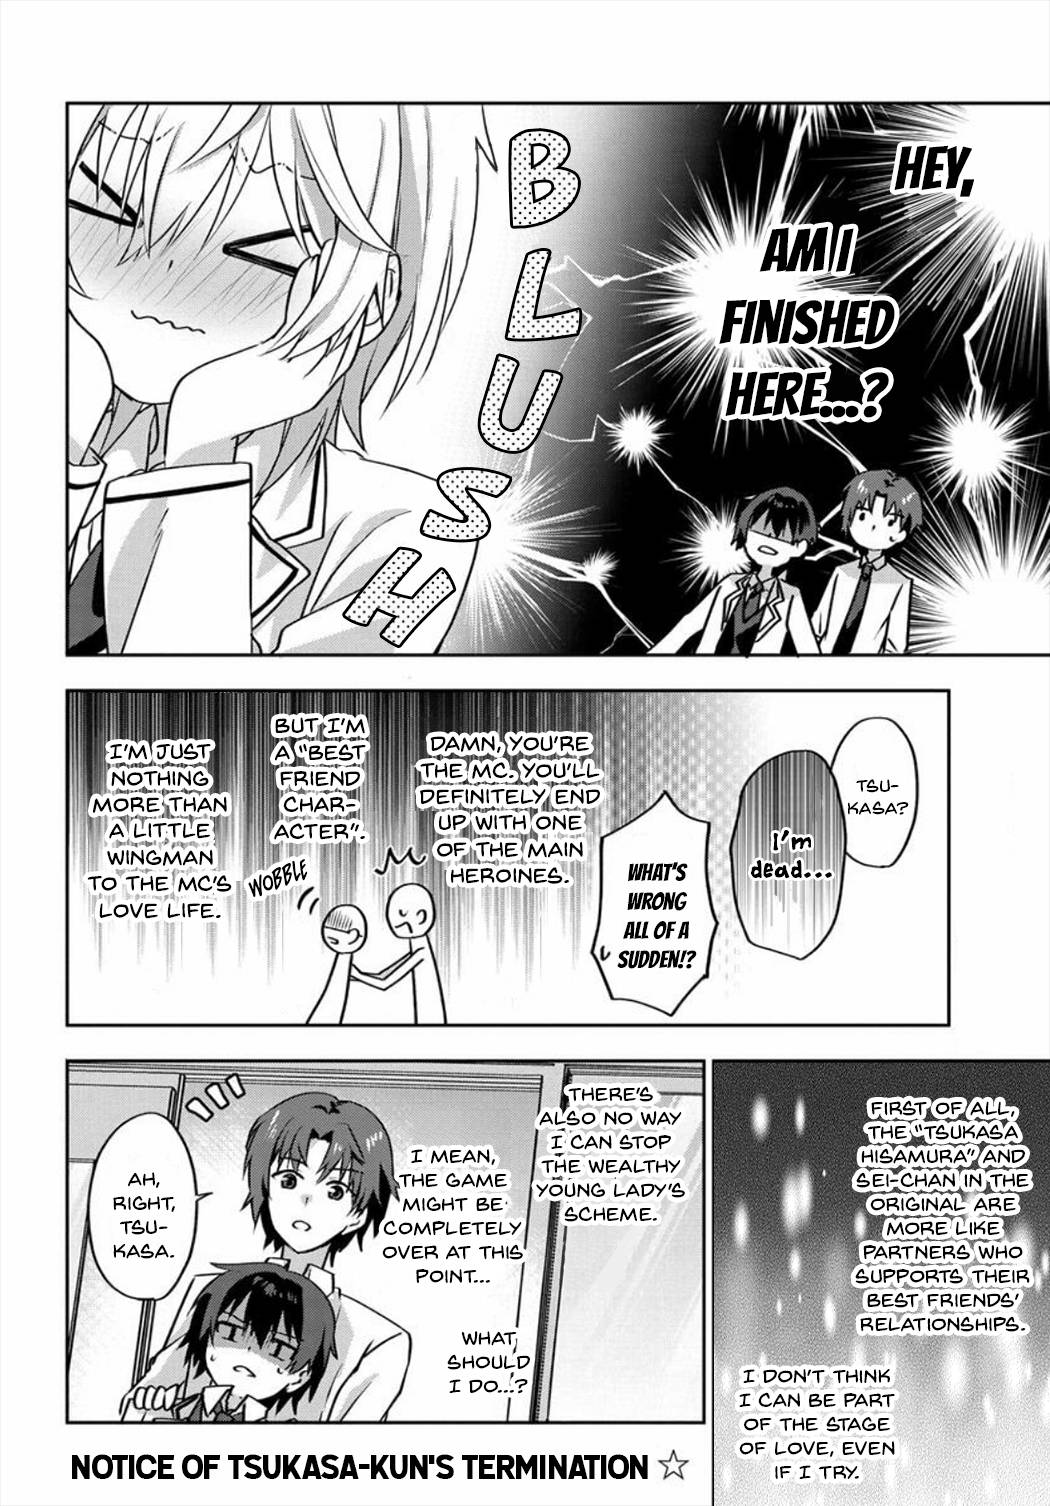 Since I’Ve Entered The World Of Romantic Comedy Manga, I’Ll Do My Best To Make The Losing Heroine Happy - chapter 3.2 - #1